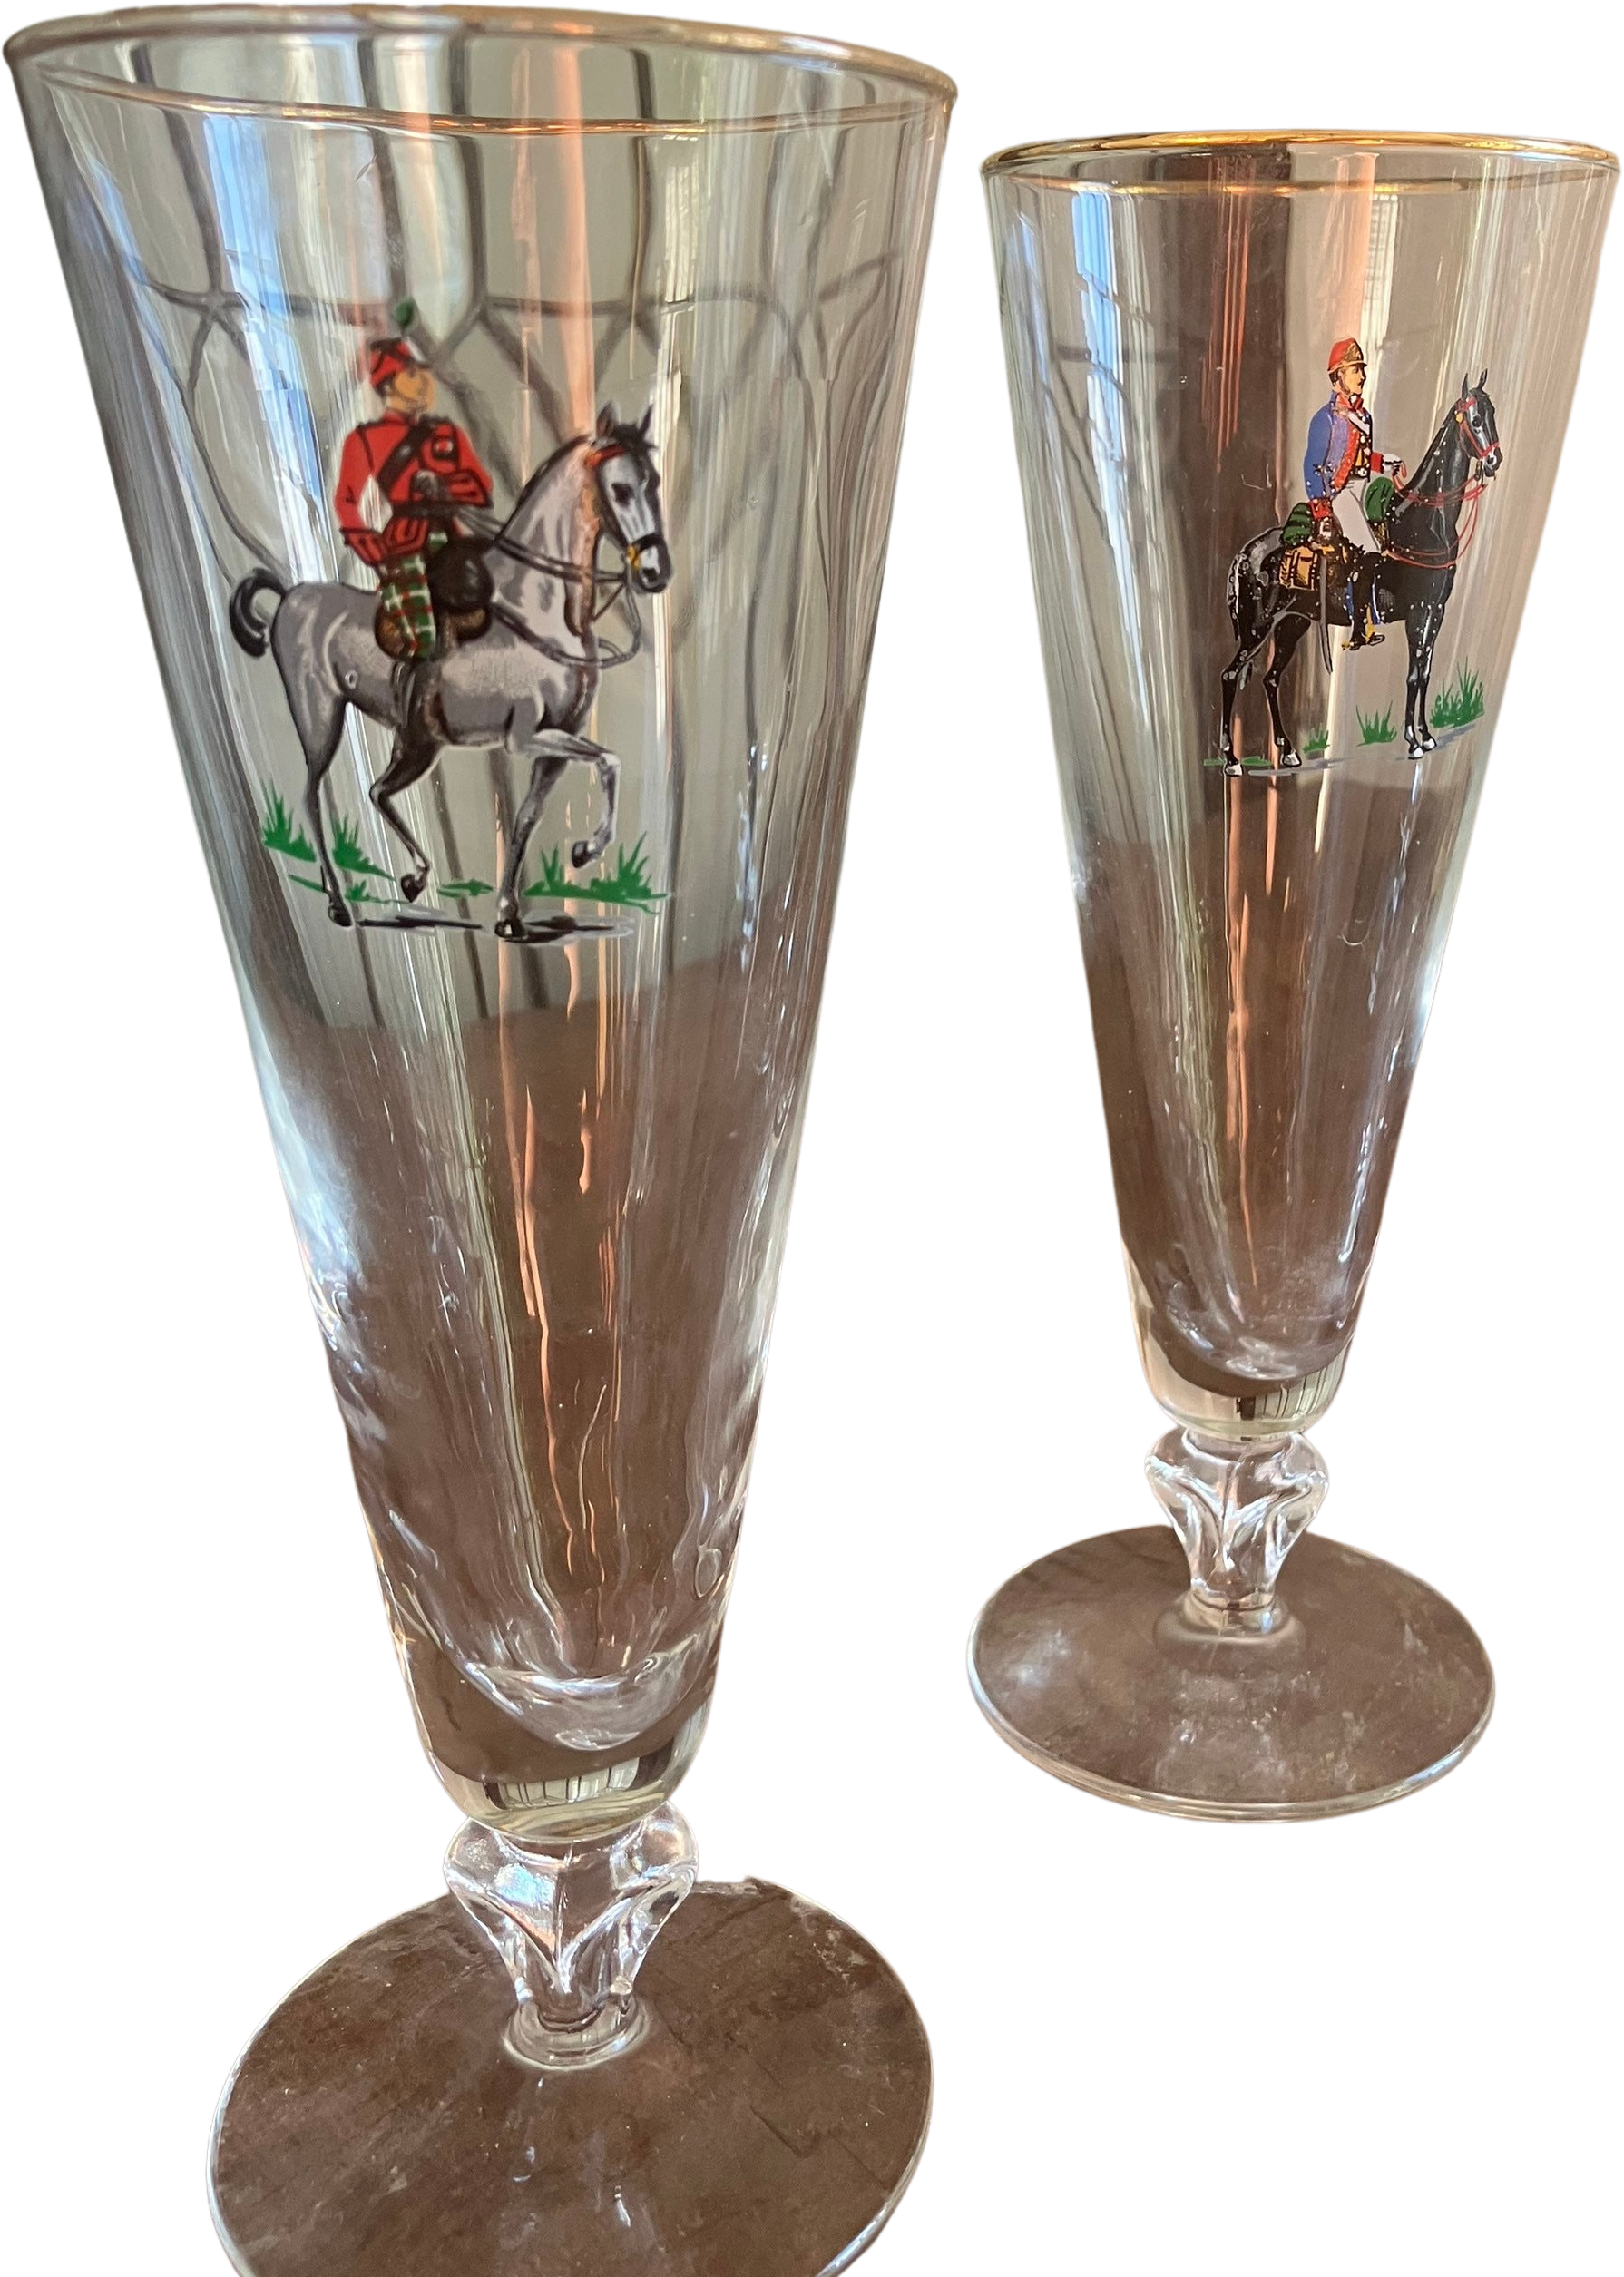 Peroni Set of 4 Italian Beer Glasses with Etched Logo 